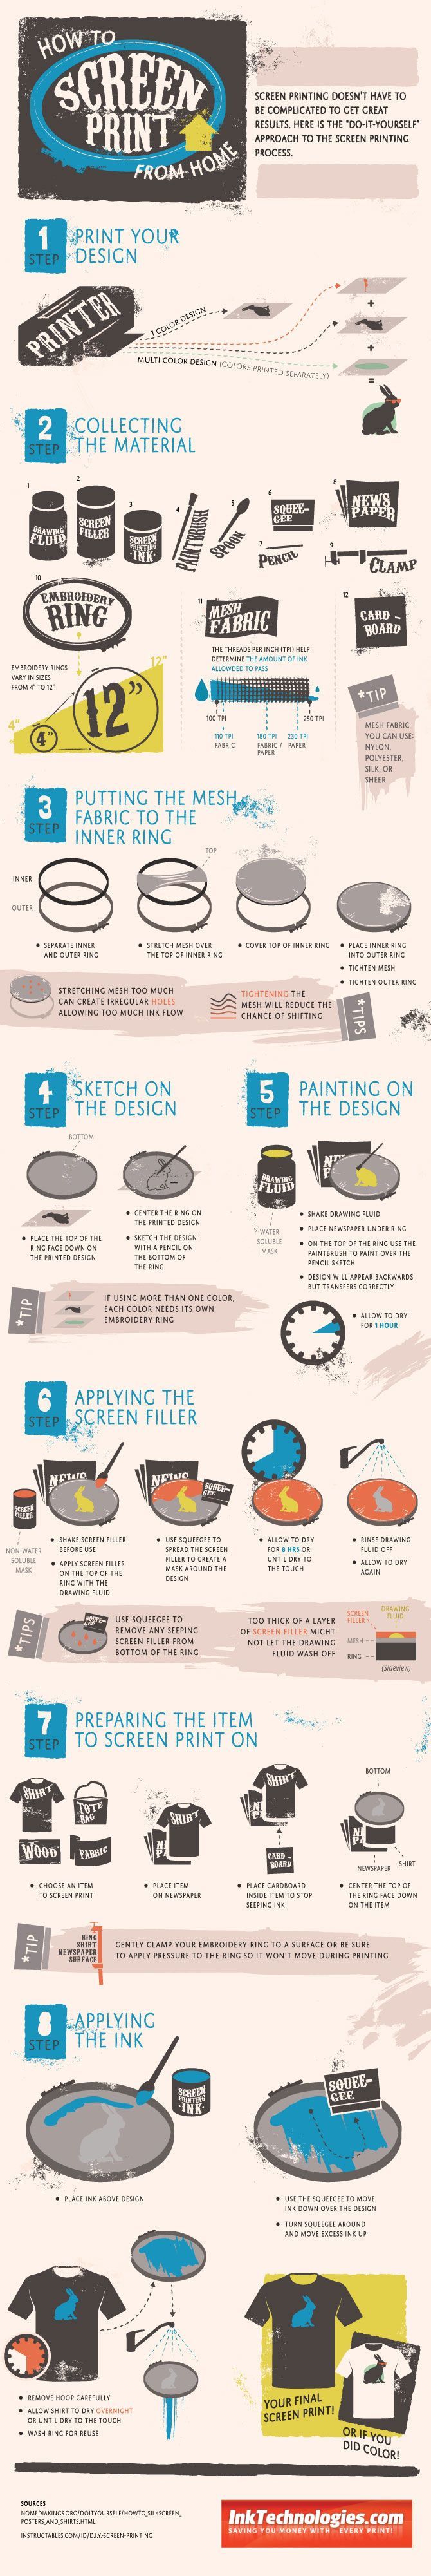 From Lifehack – How to Screen Print at Home in 8 Easy Steps